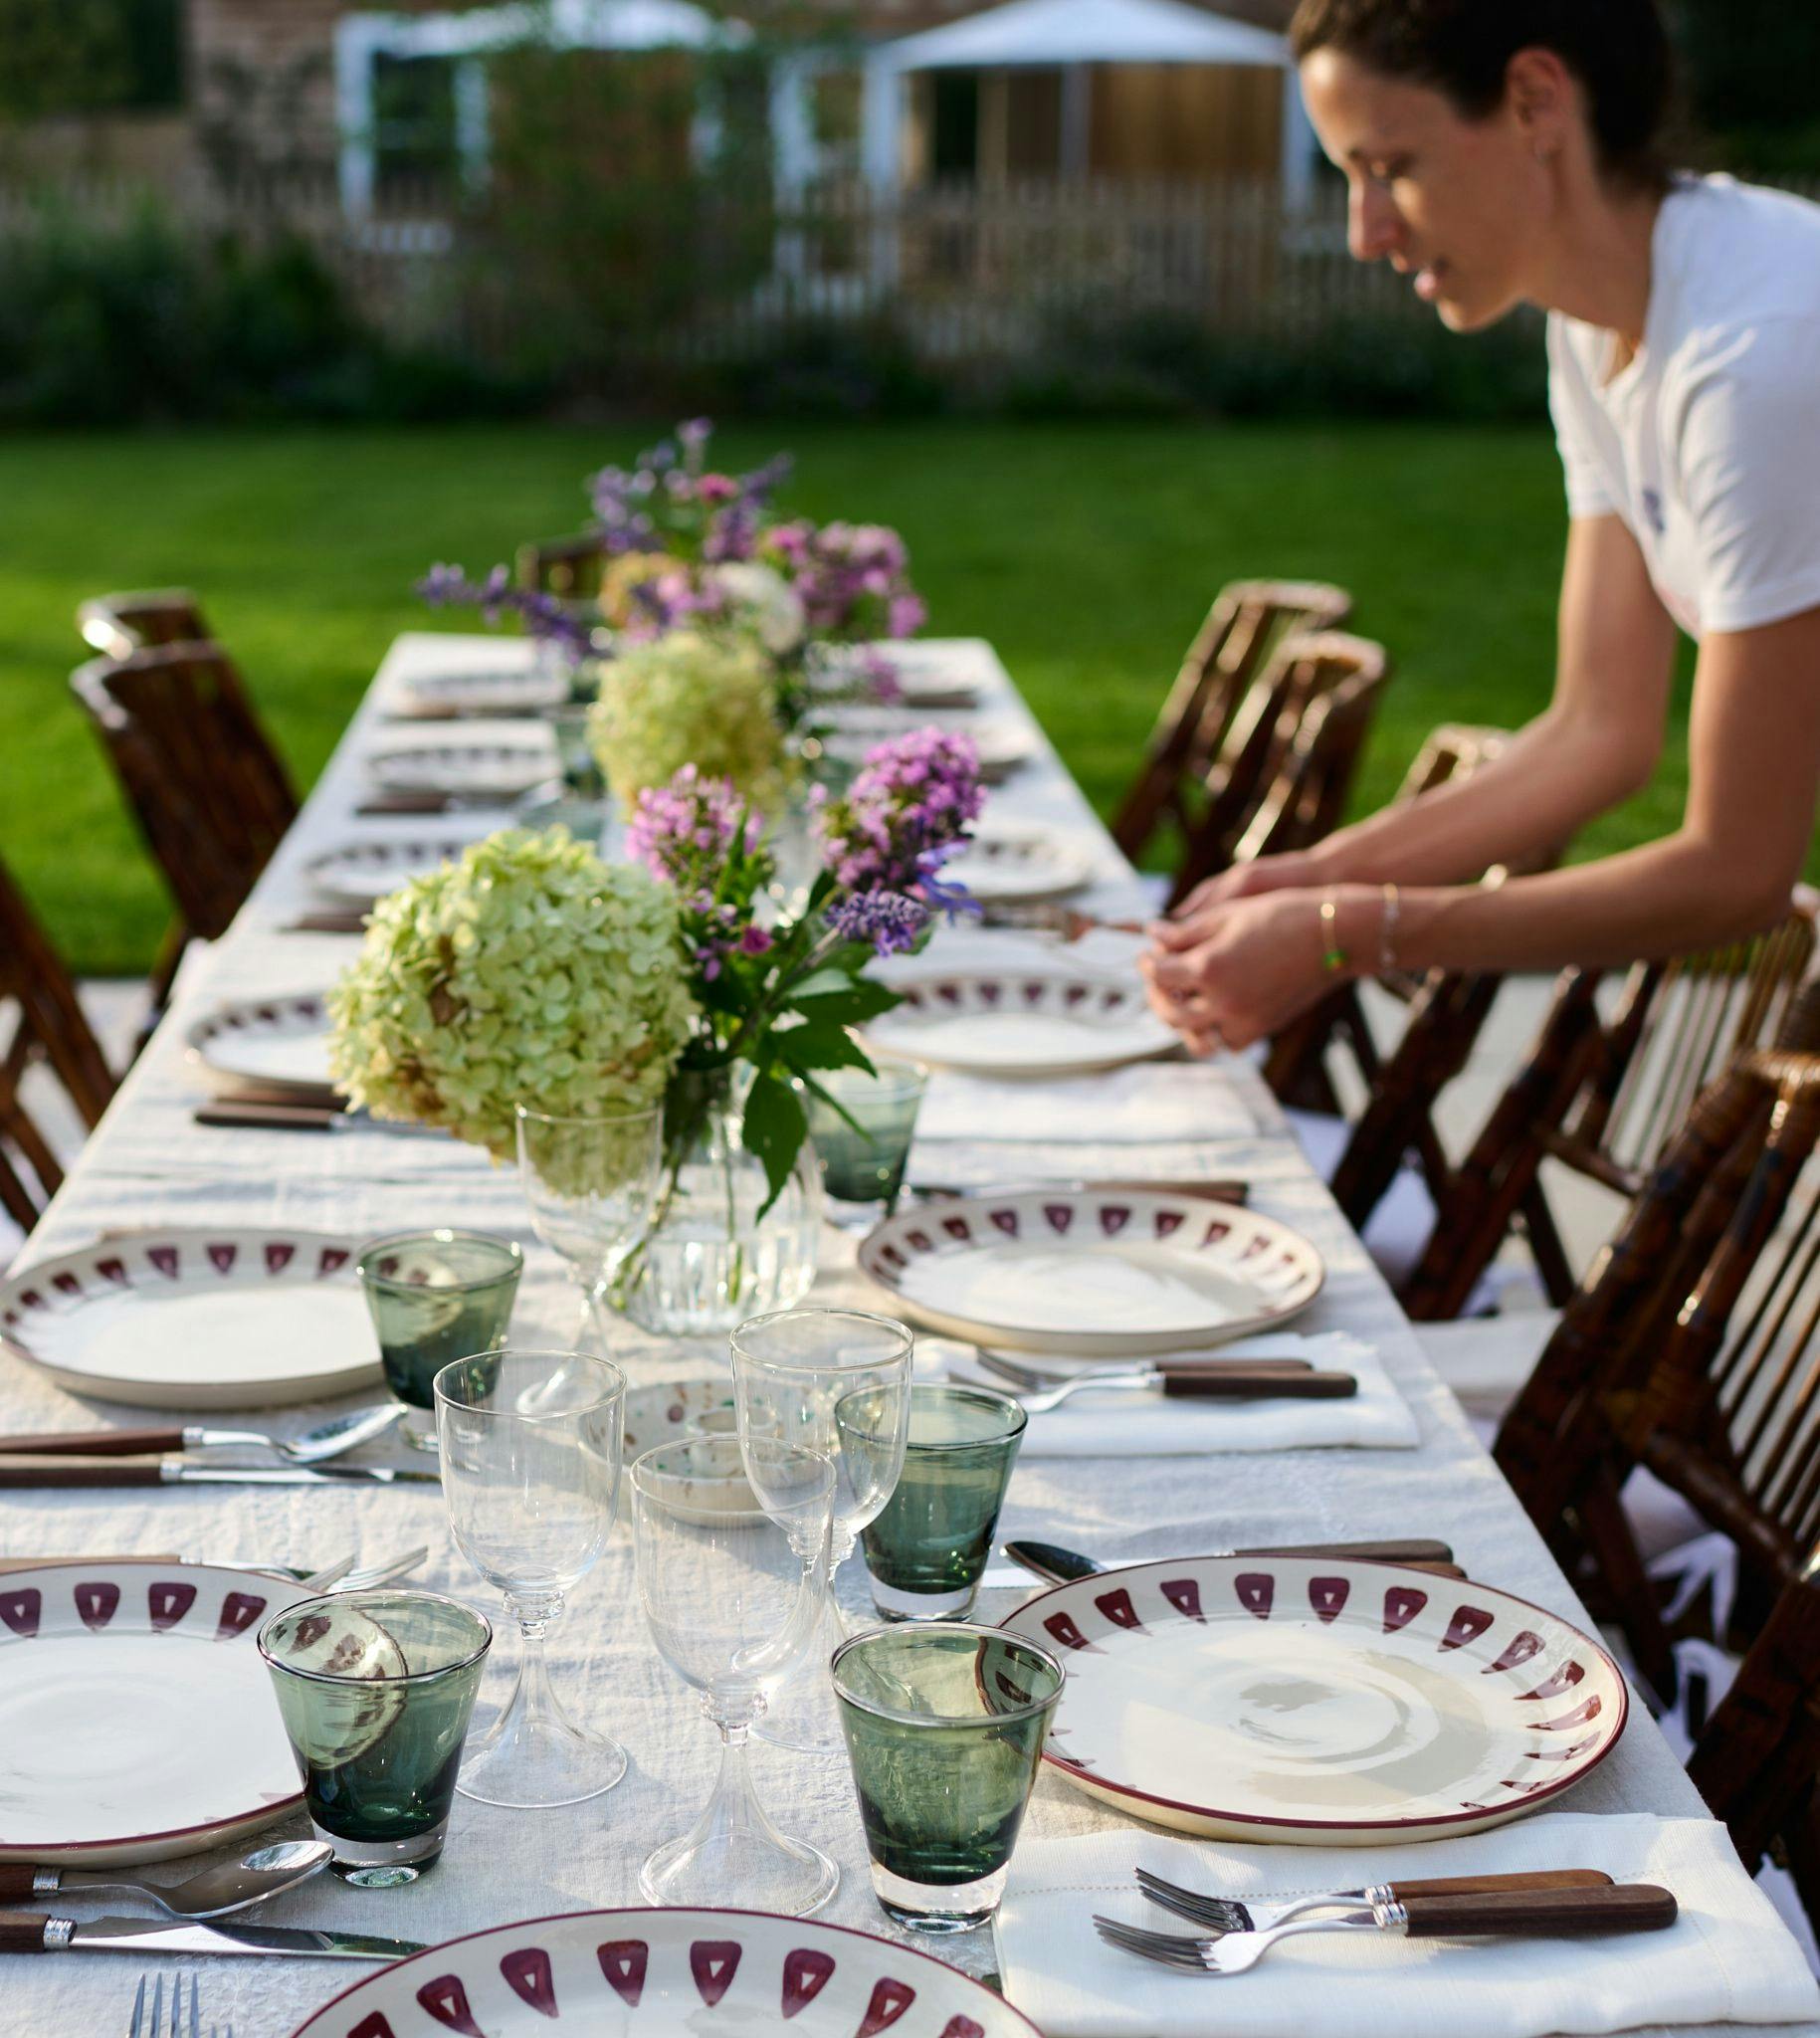 host setting a table outdoors